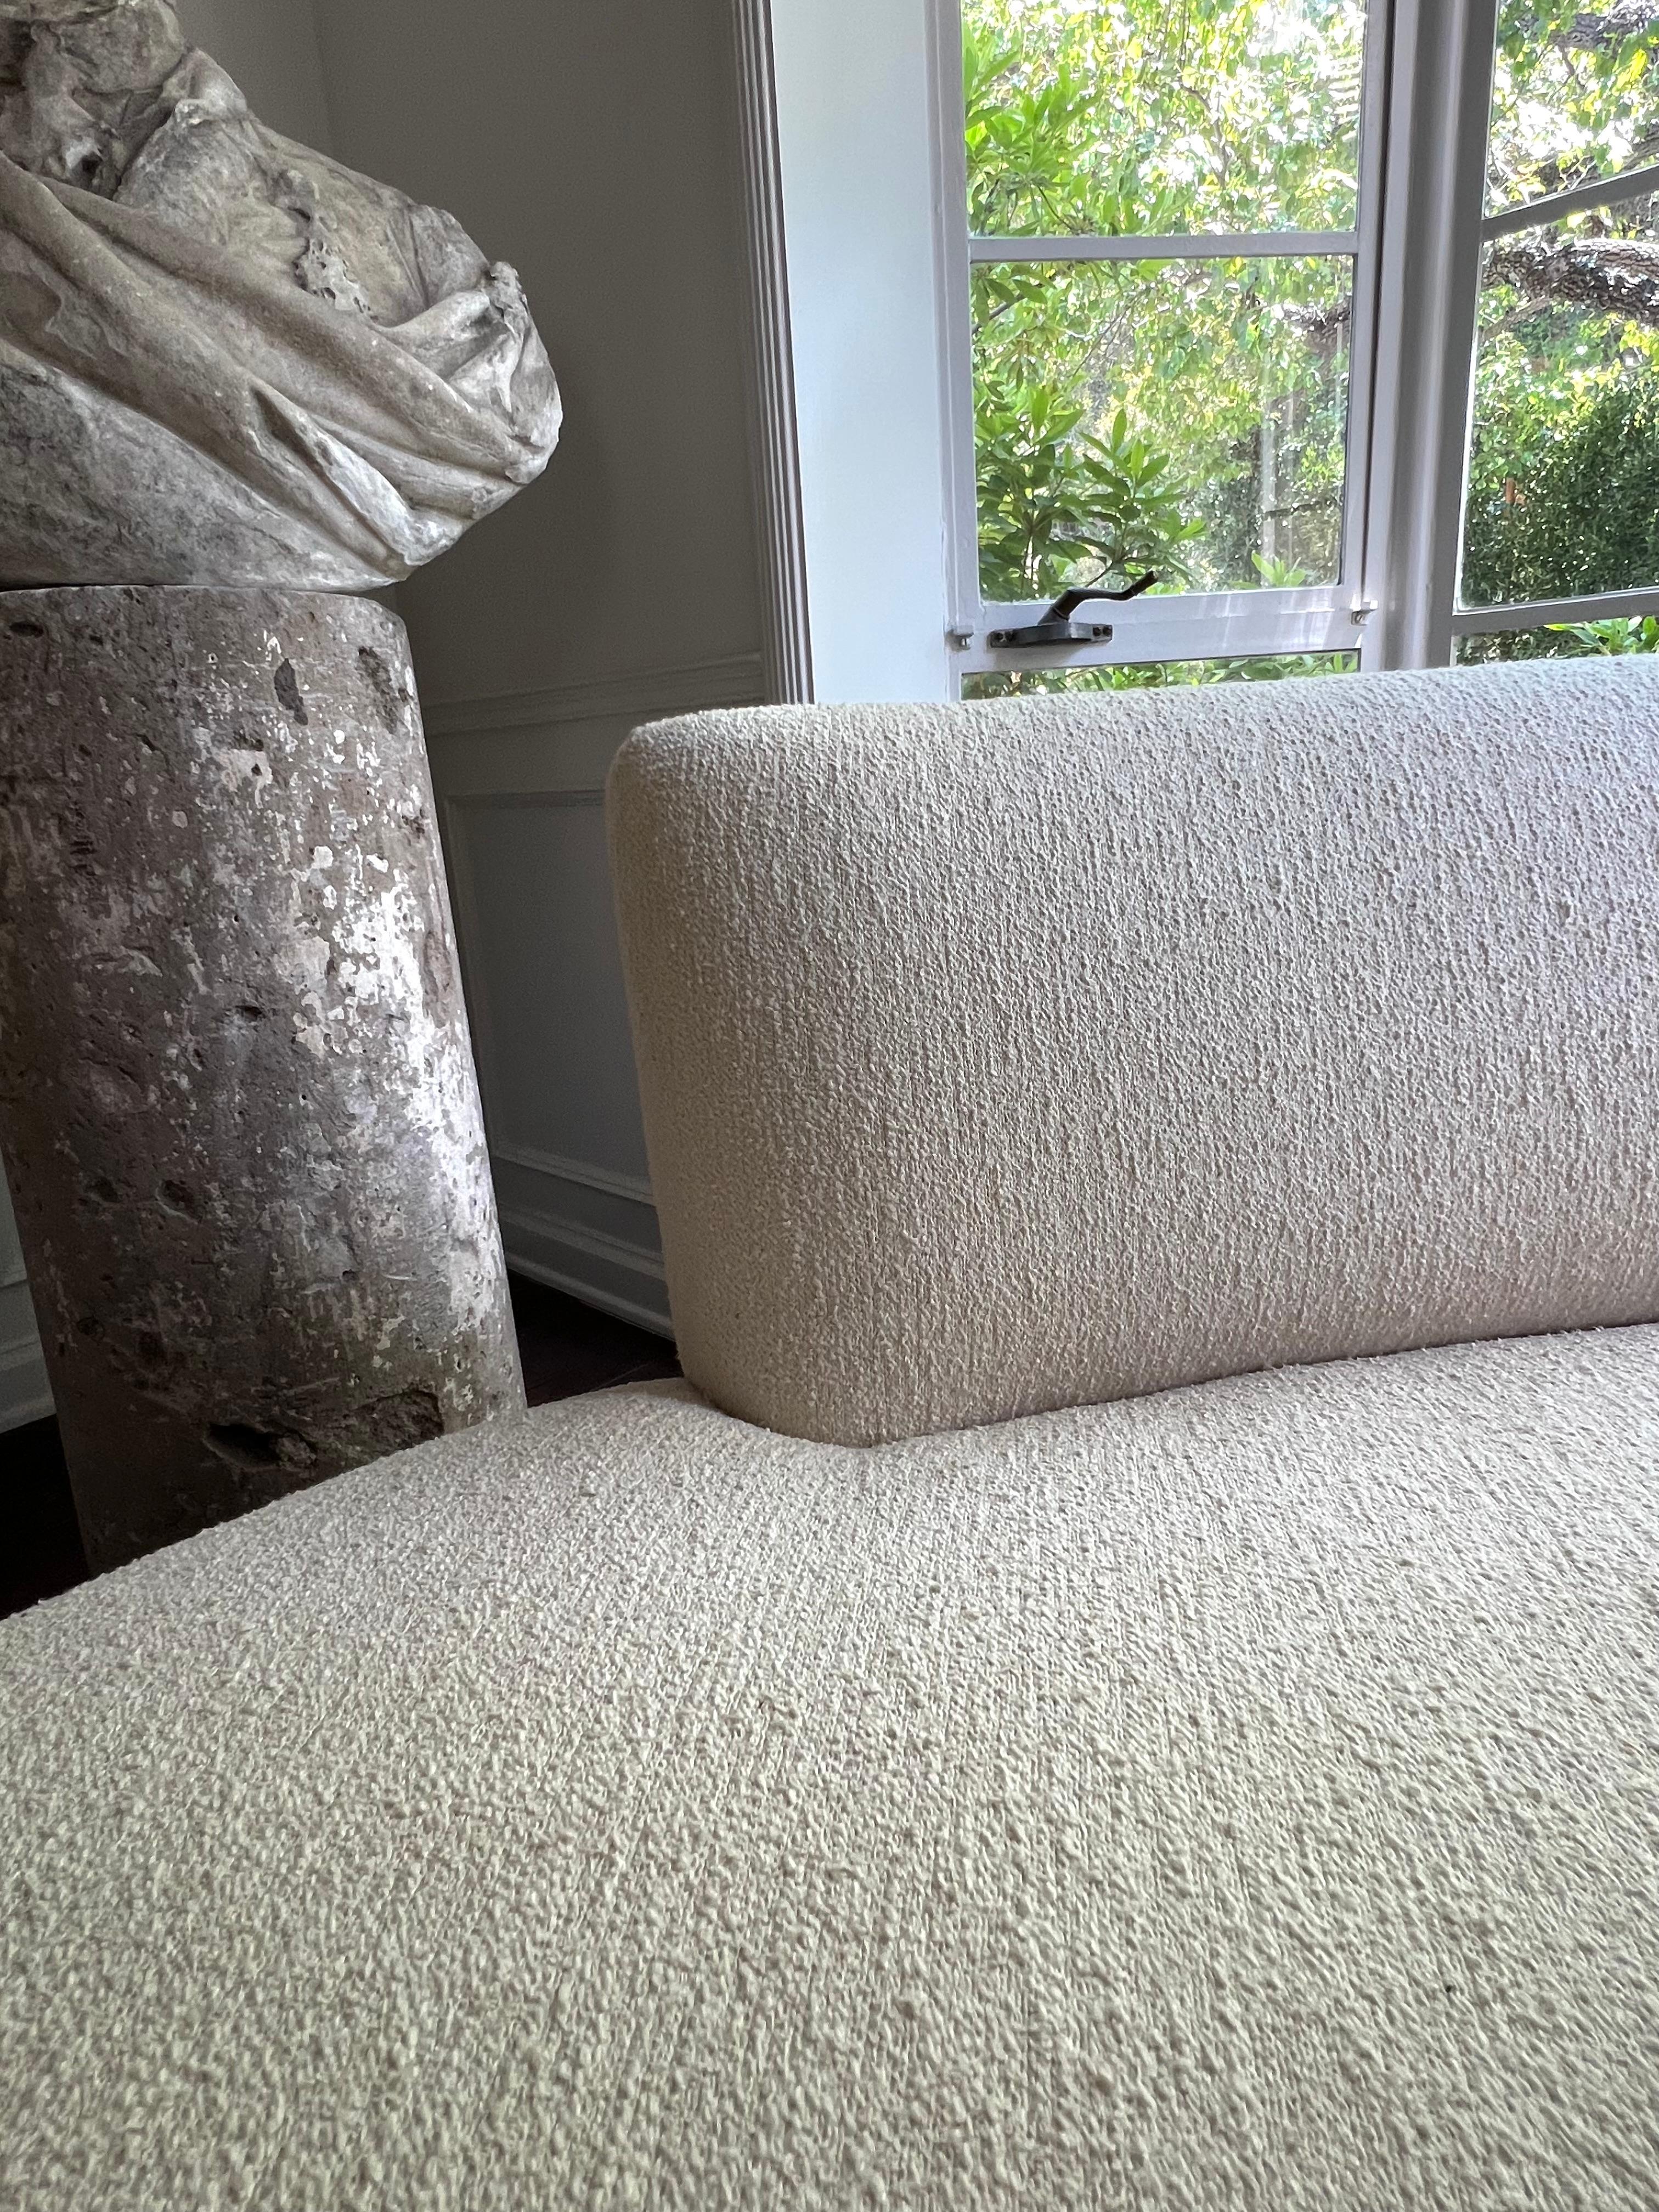 Curved Serpentine-Inspired Sofa in Creamy Boucle In Excellent Condition For Sale In West Hollywood, CA